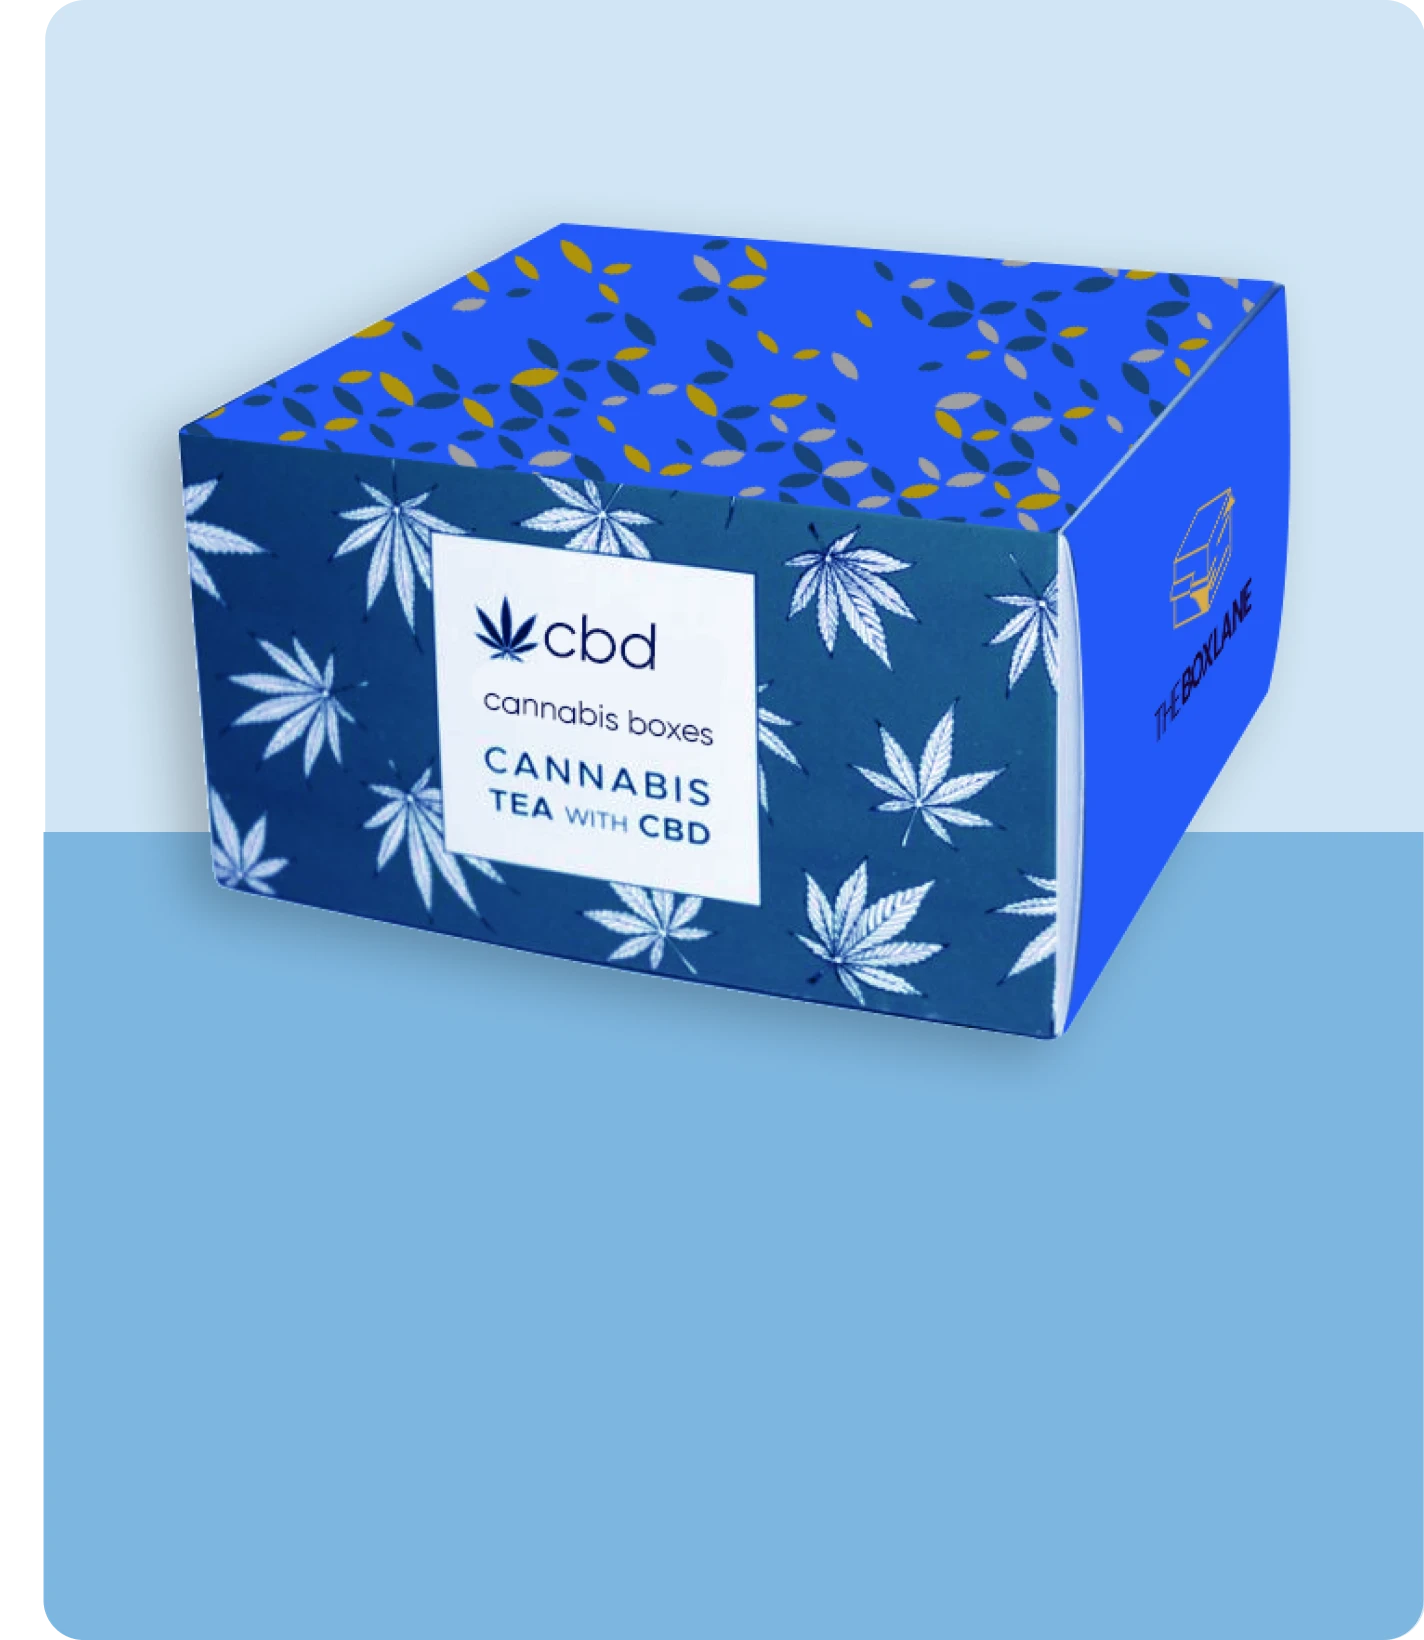 Custom Cannabis packging related boxes | The Box Lane